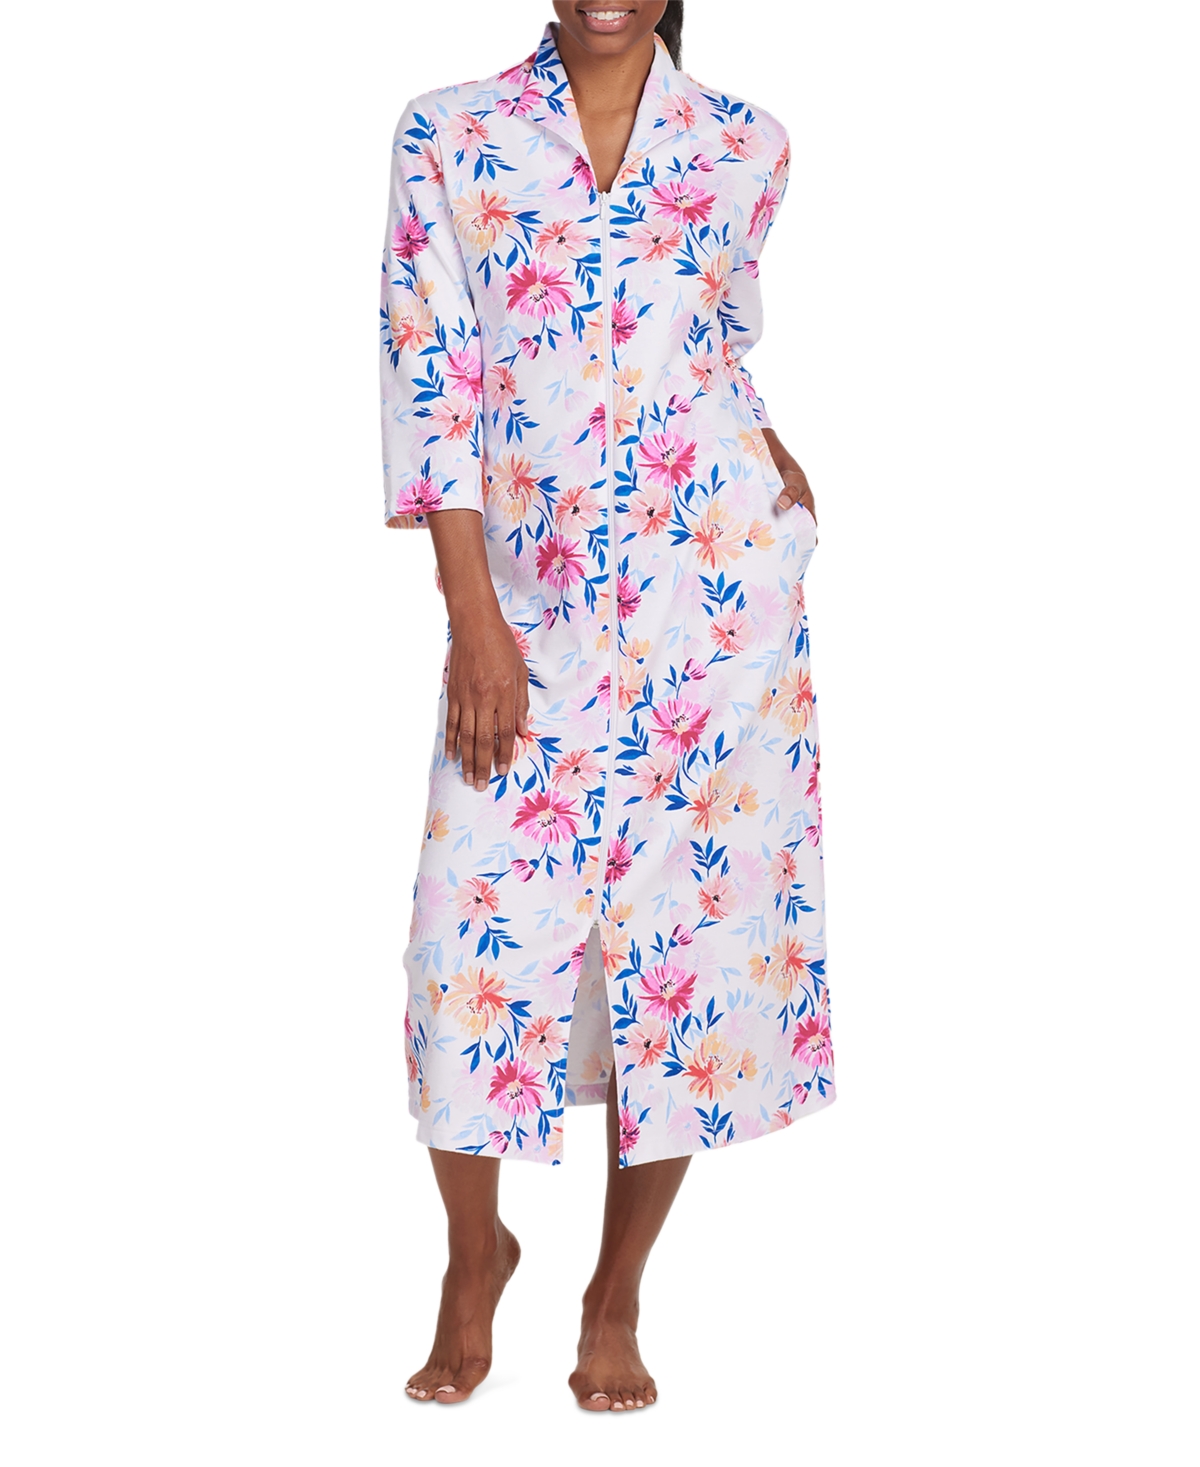 Women's Floral-Print Knit Long Zip Robe - Pink Roses On Navy